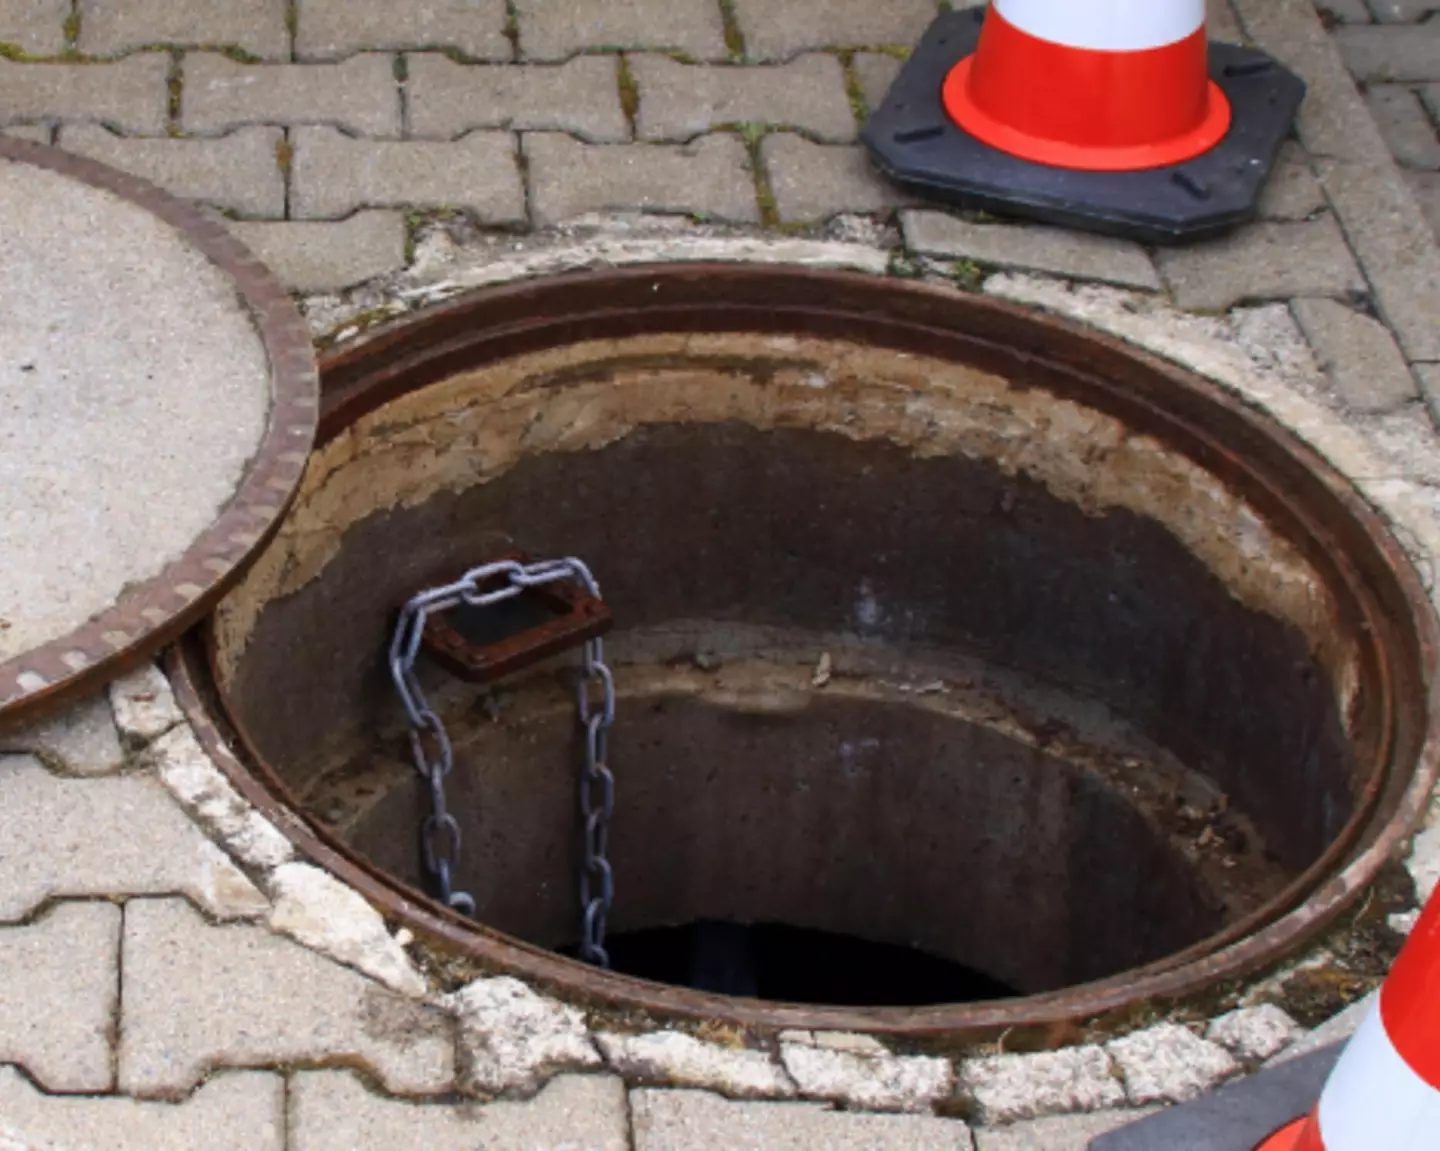 The manhole murder was the story that came to mind for the forensic pathologist.